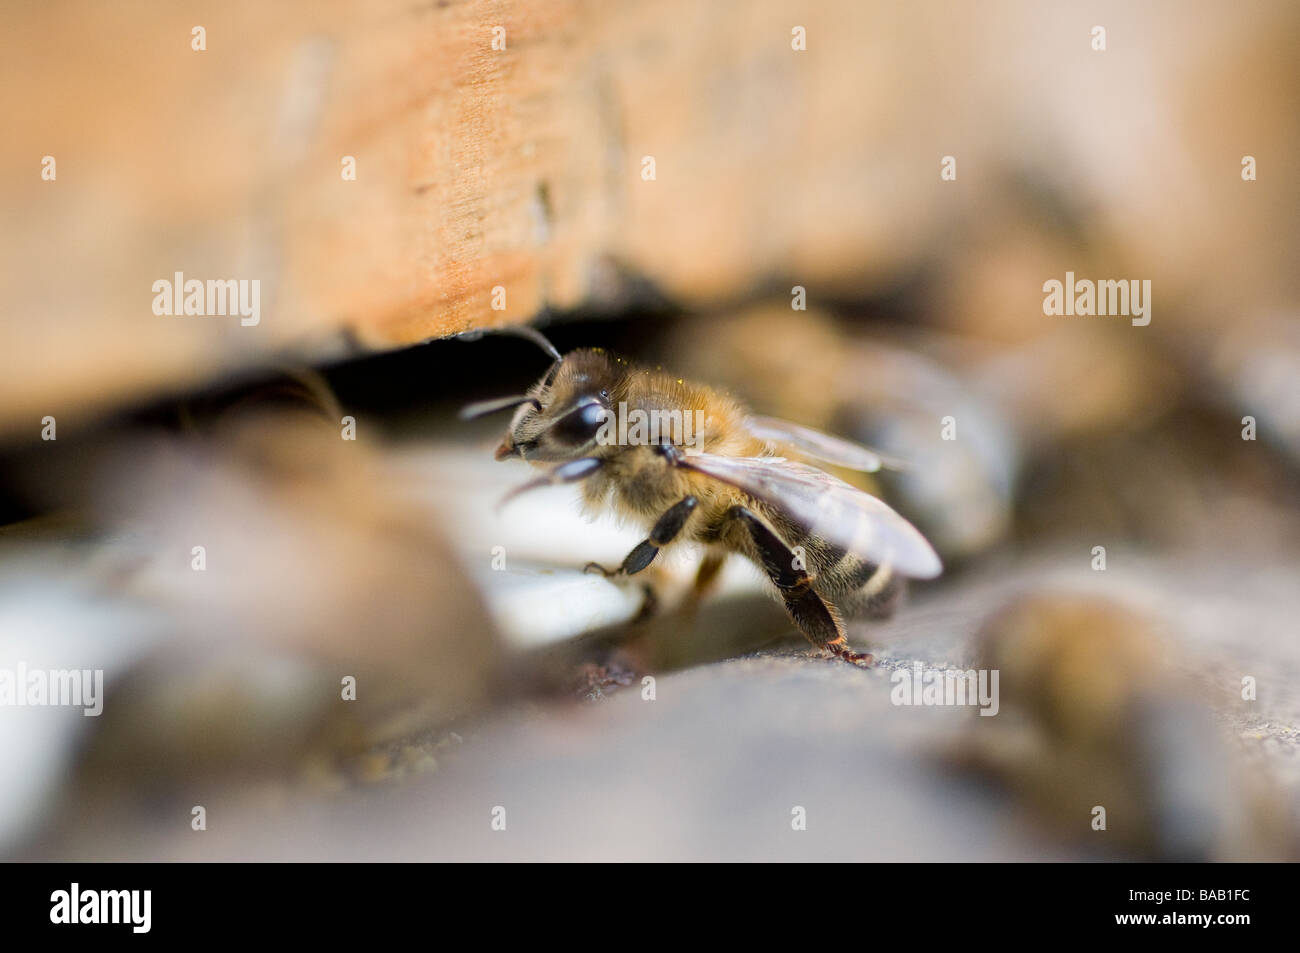 Closeup of honey bees in a hive entrance Stock Photo